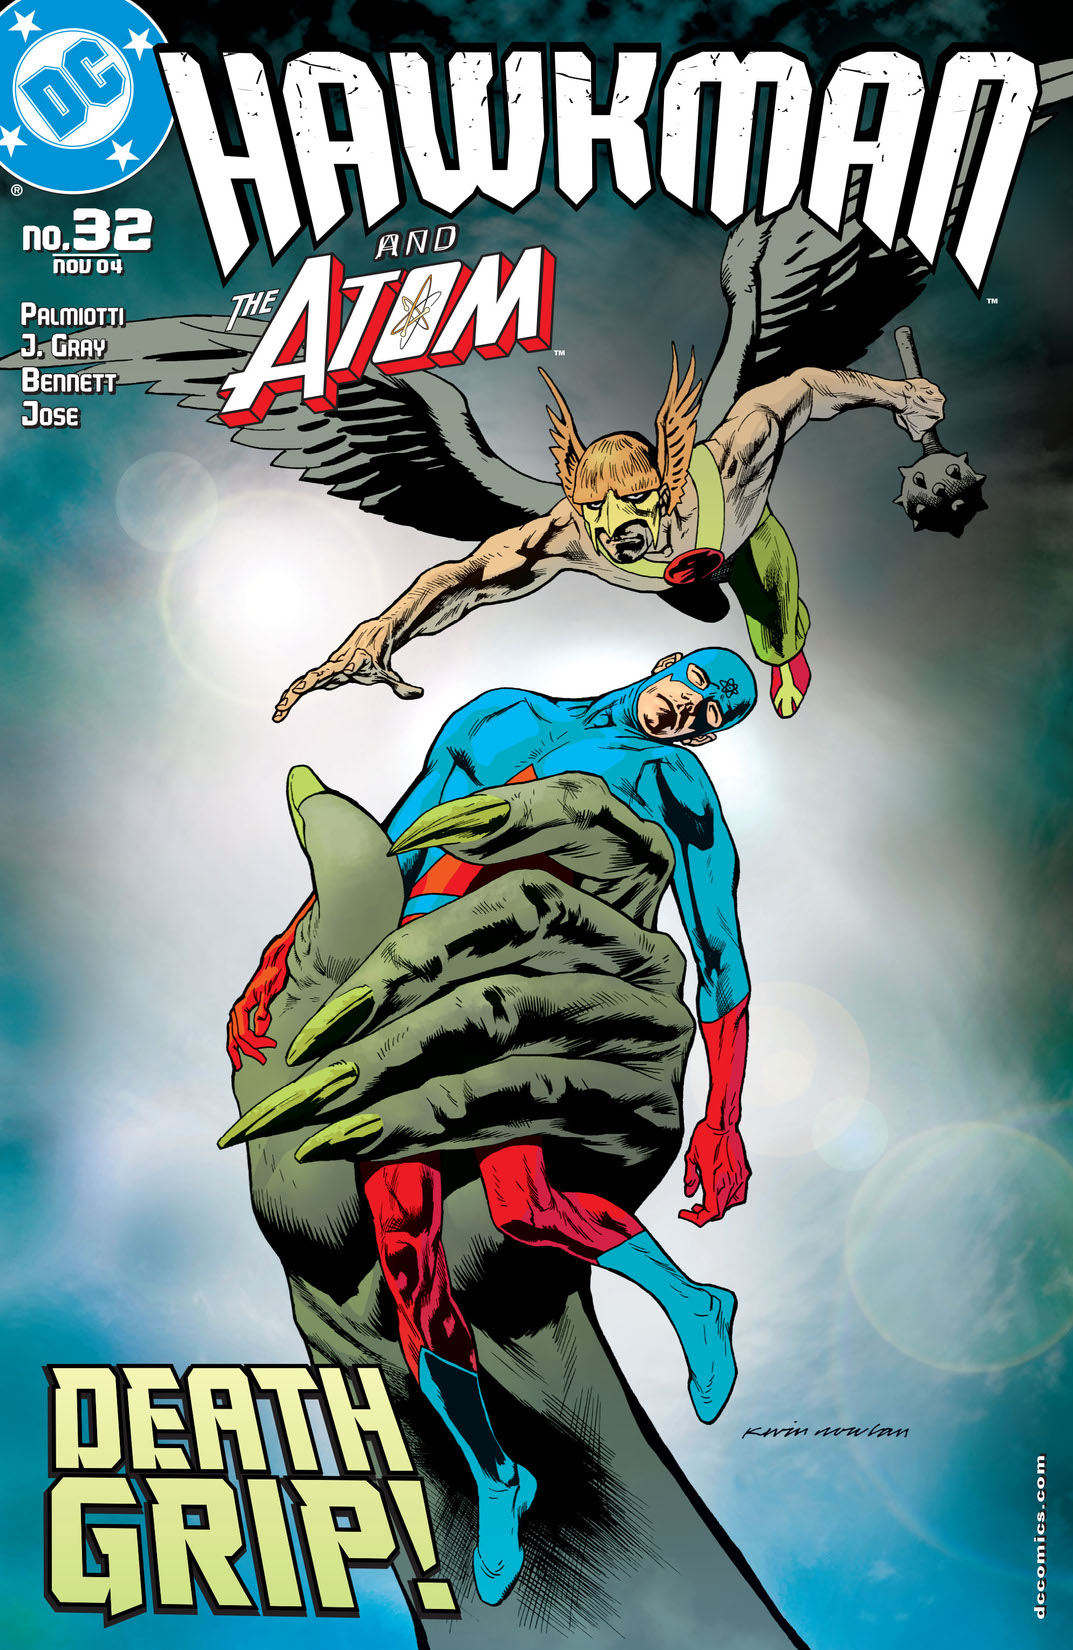 Hawkman (2002-) #32 preview images